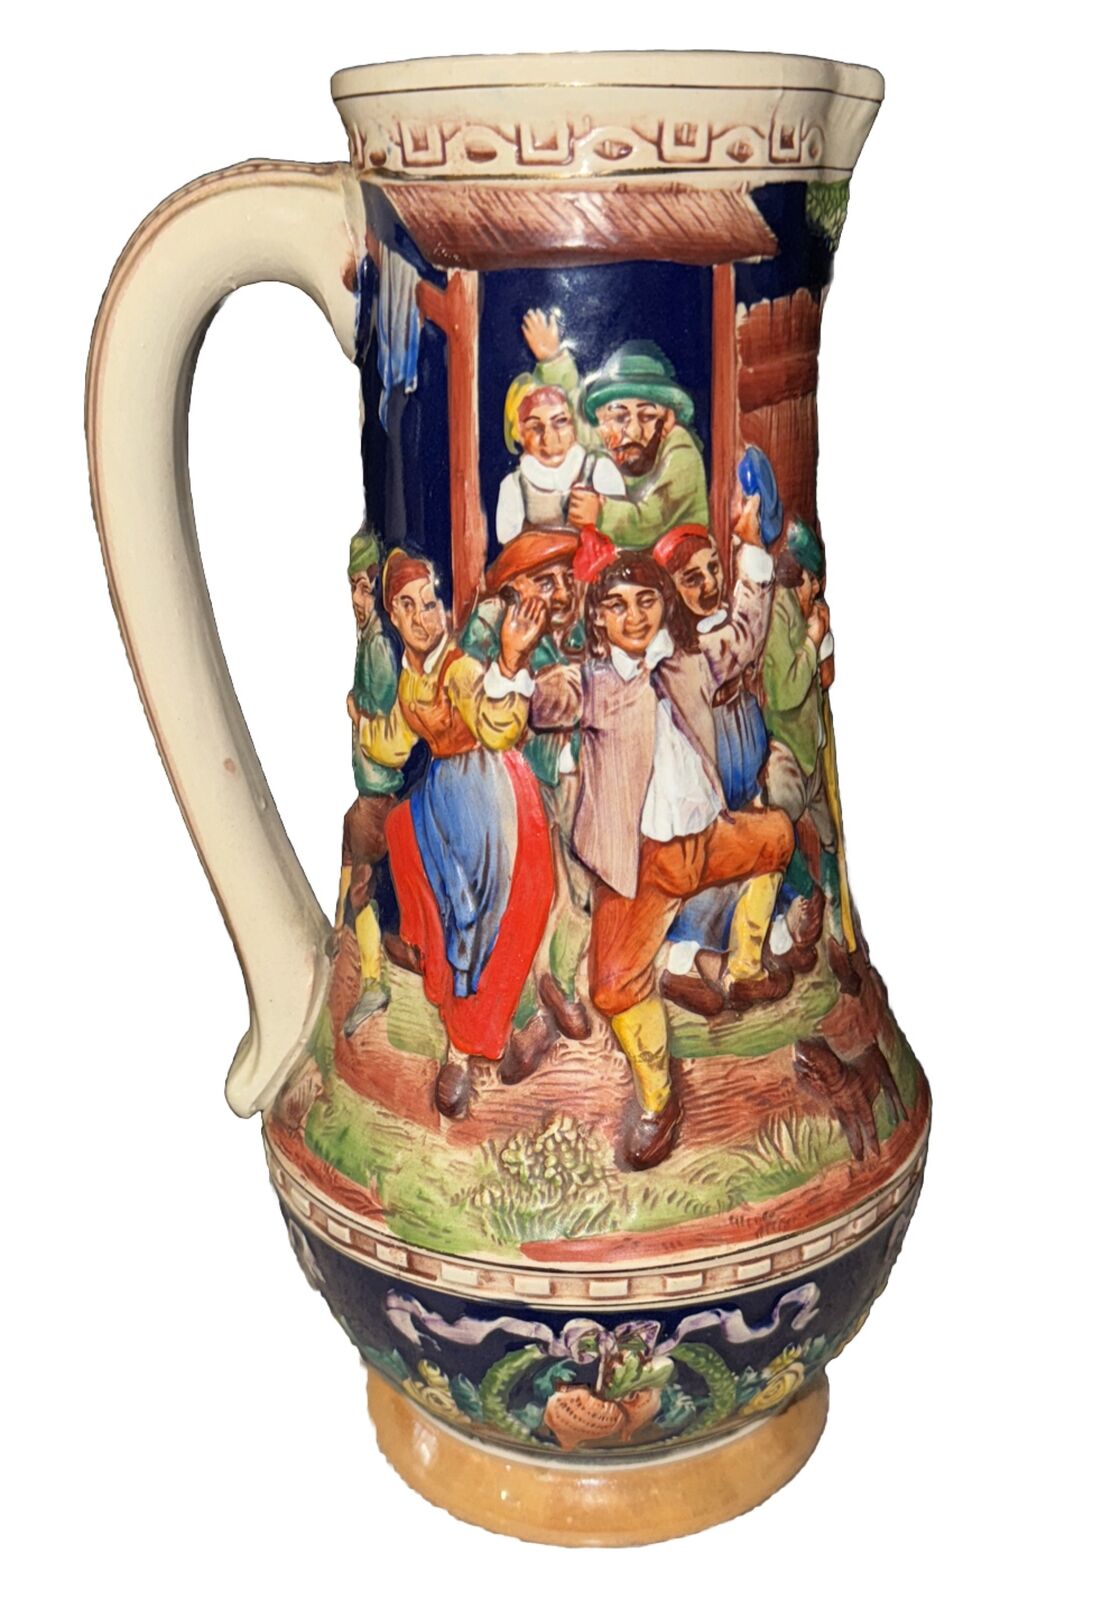 Vintage Gerz Limited Large Beer Stein #11 Production 1862 Flawless